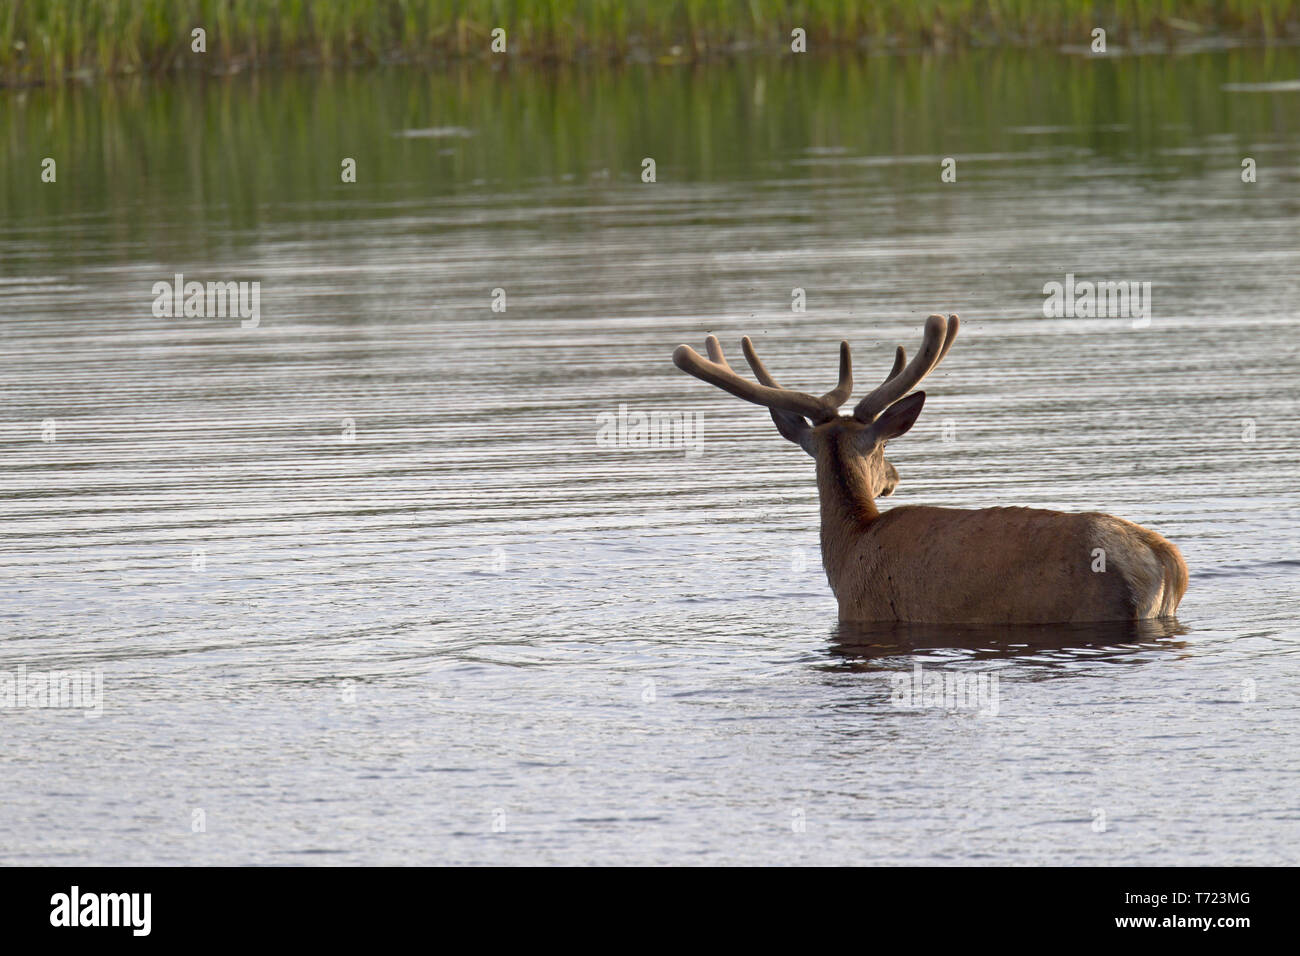 Red stag with velvet-covered antlers in a pond Stock Photo